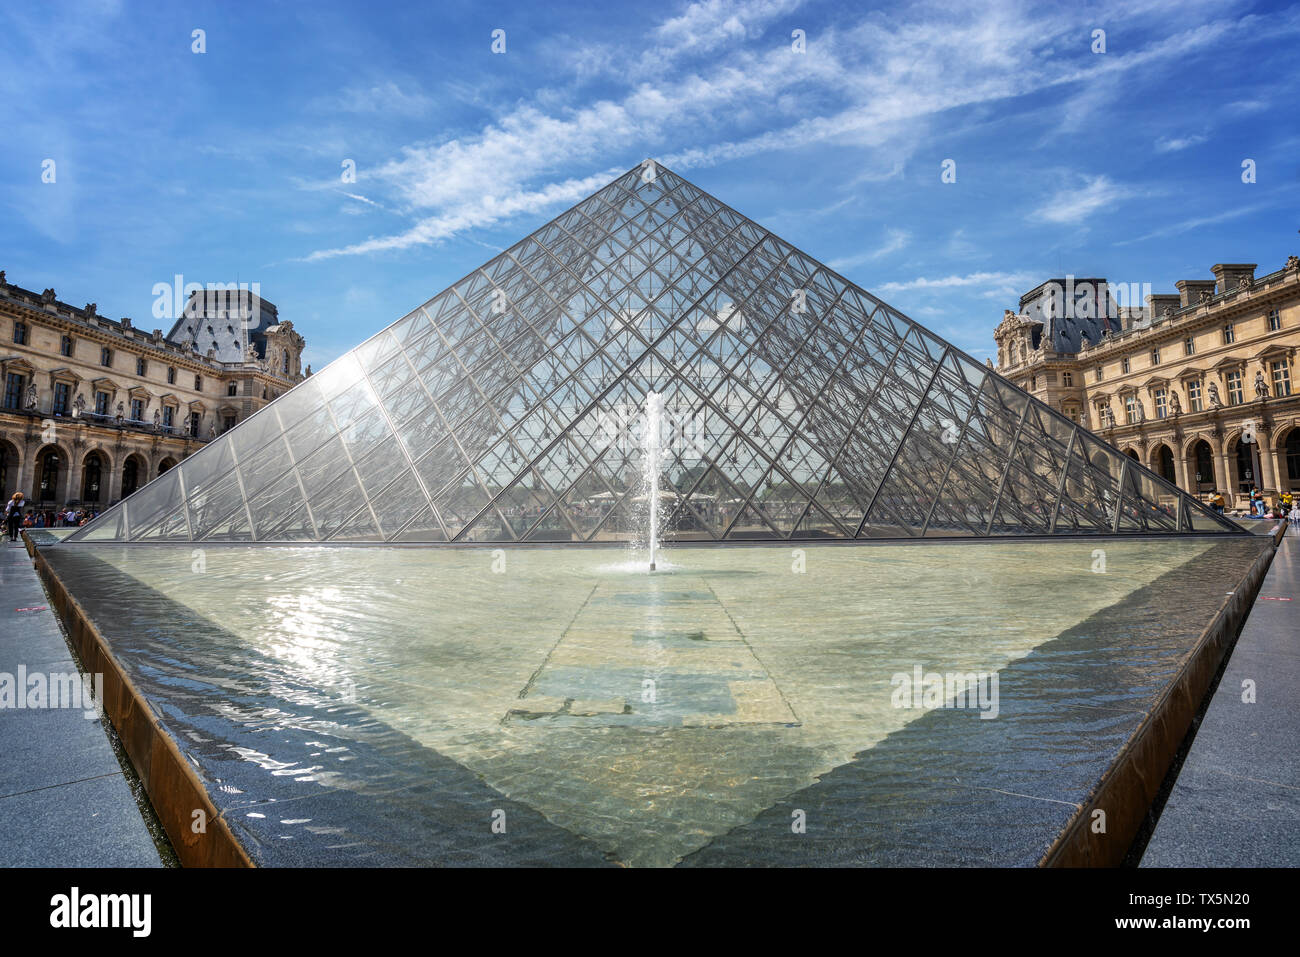 Louvre pyramid in the main courtyard of the Louvre Palace, Paris France Stock Photo